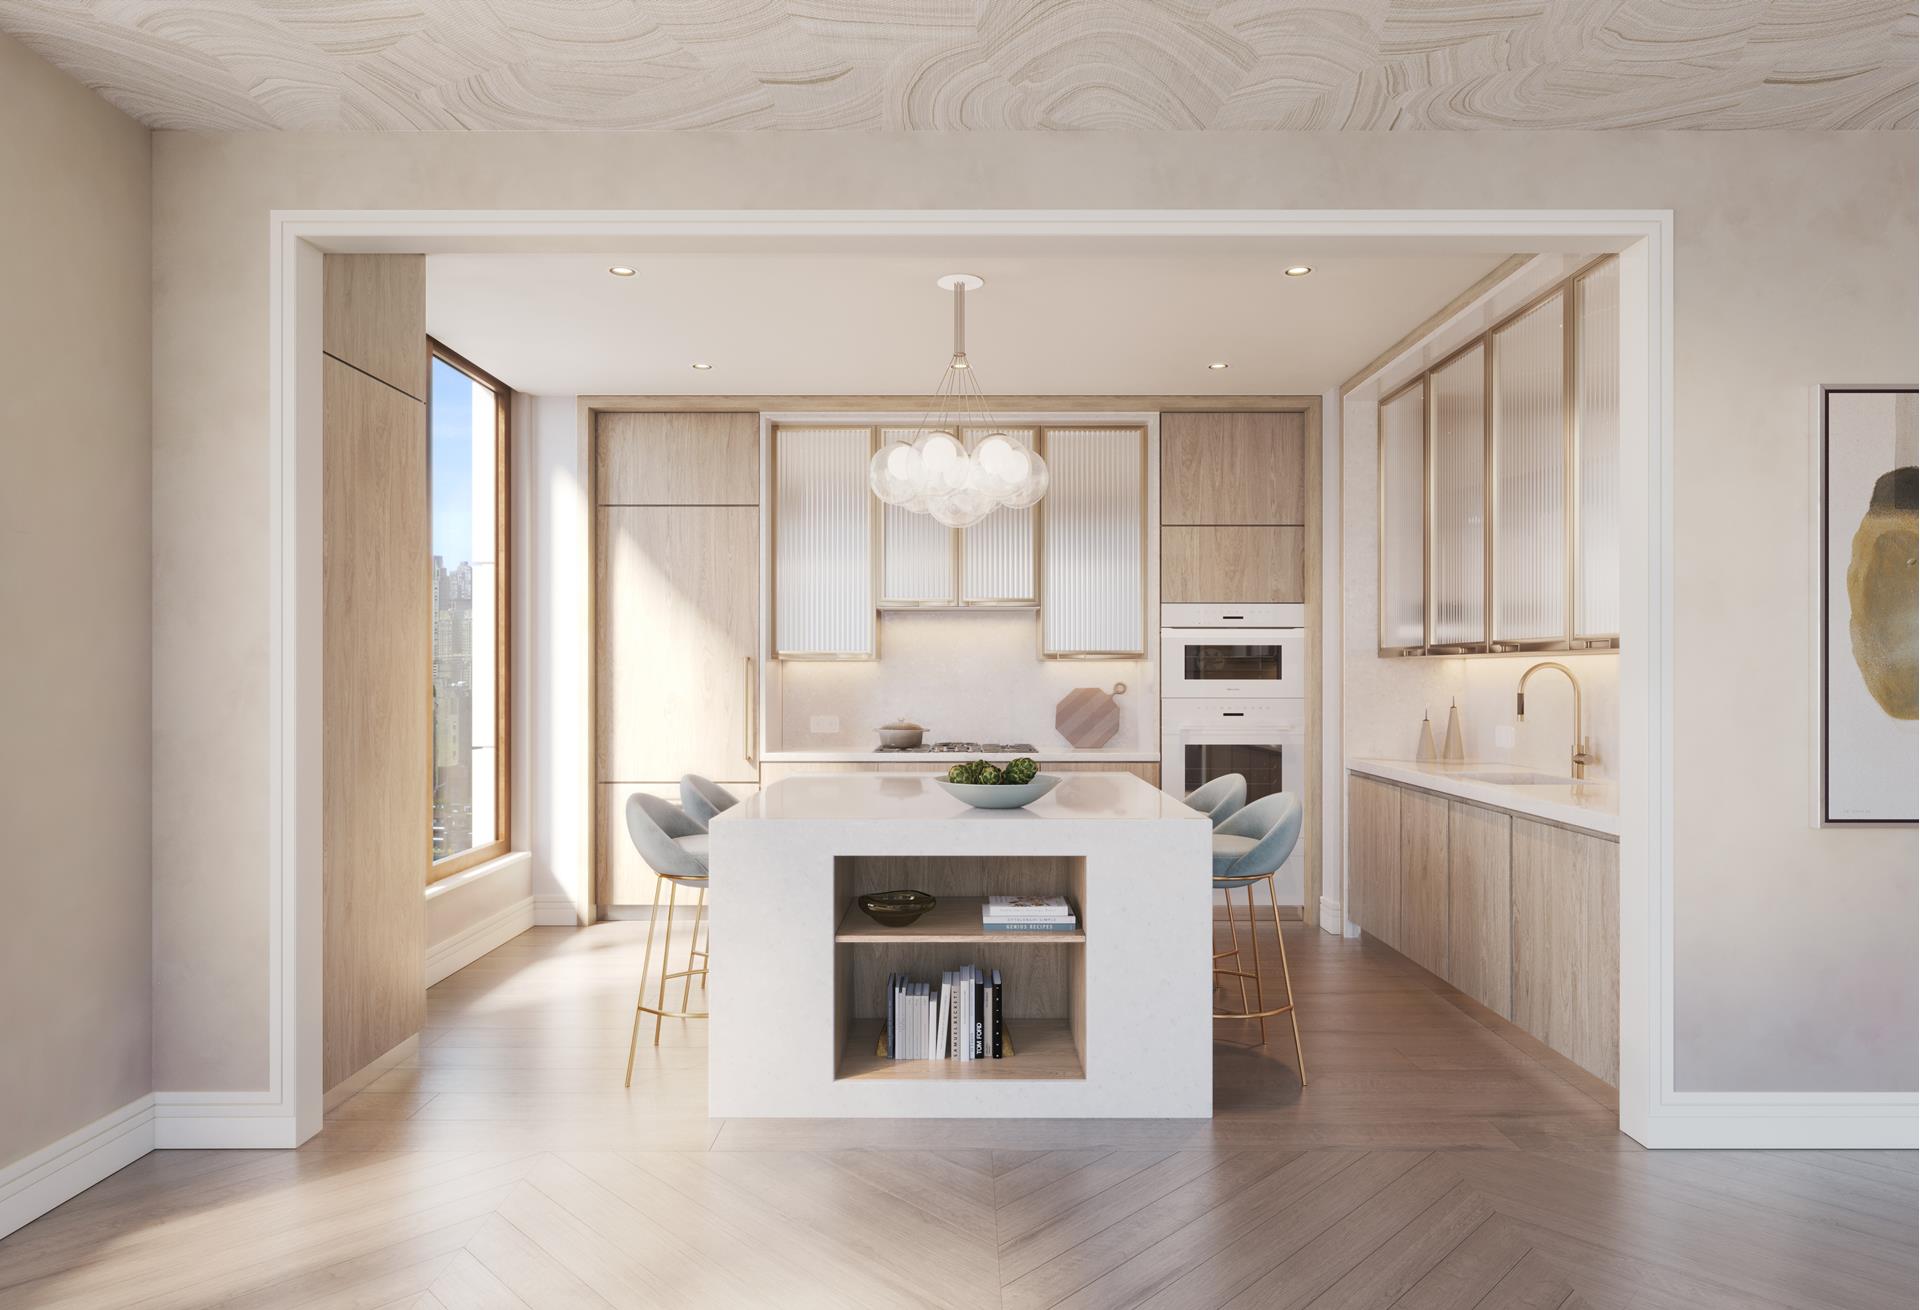 201 East 74th Street 18A, Lenox Hill, Upper East Side, NYC - 3 Bedrooms  
3.5 Bathrooms  
7 Rooms - 